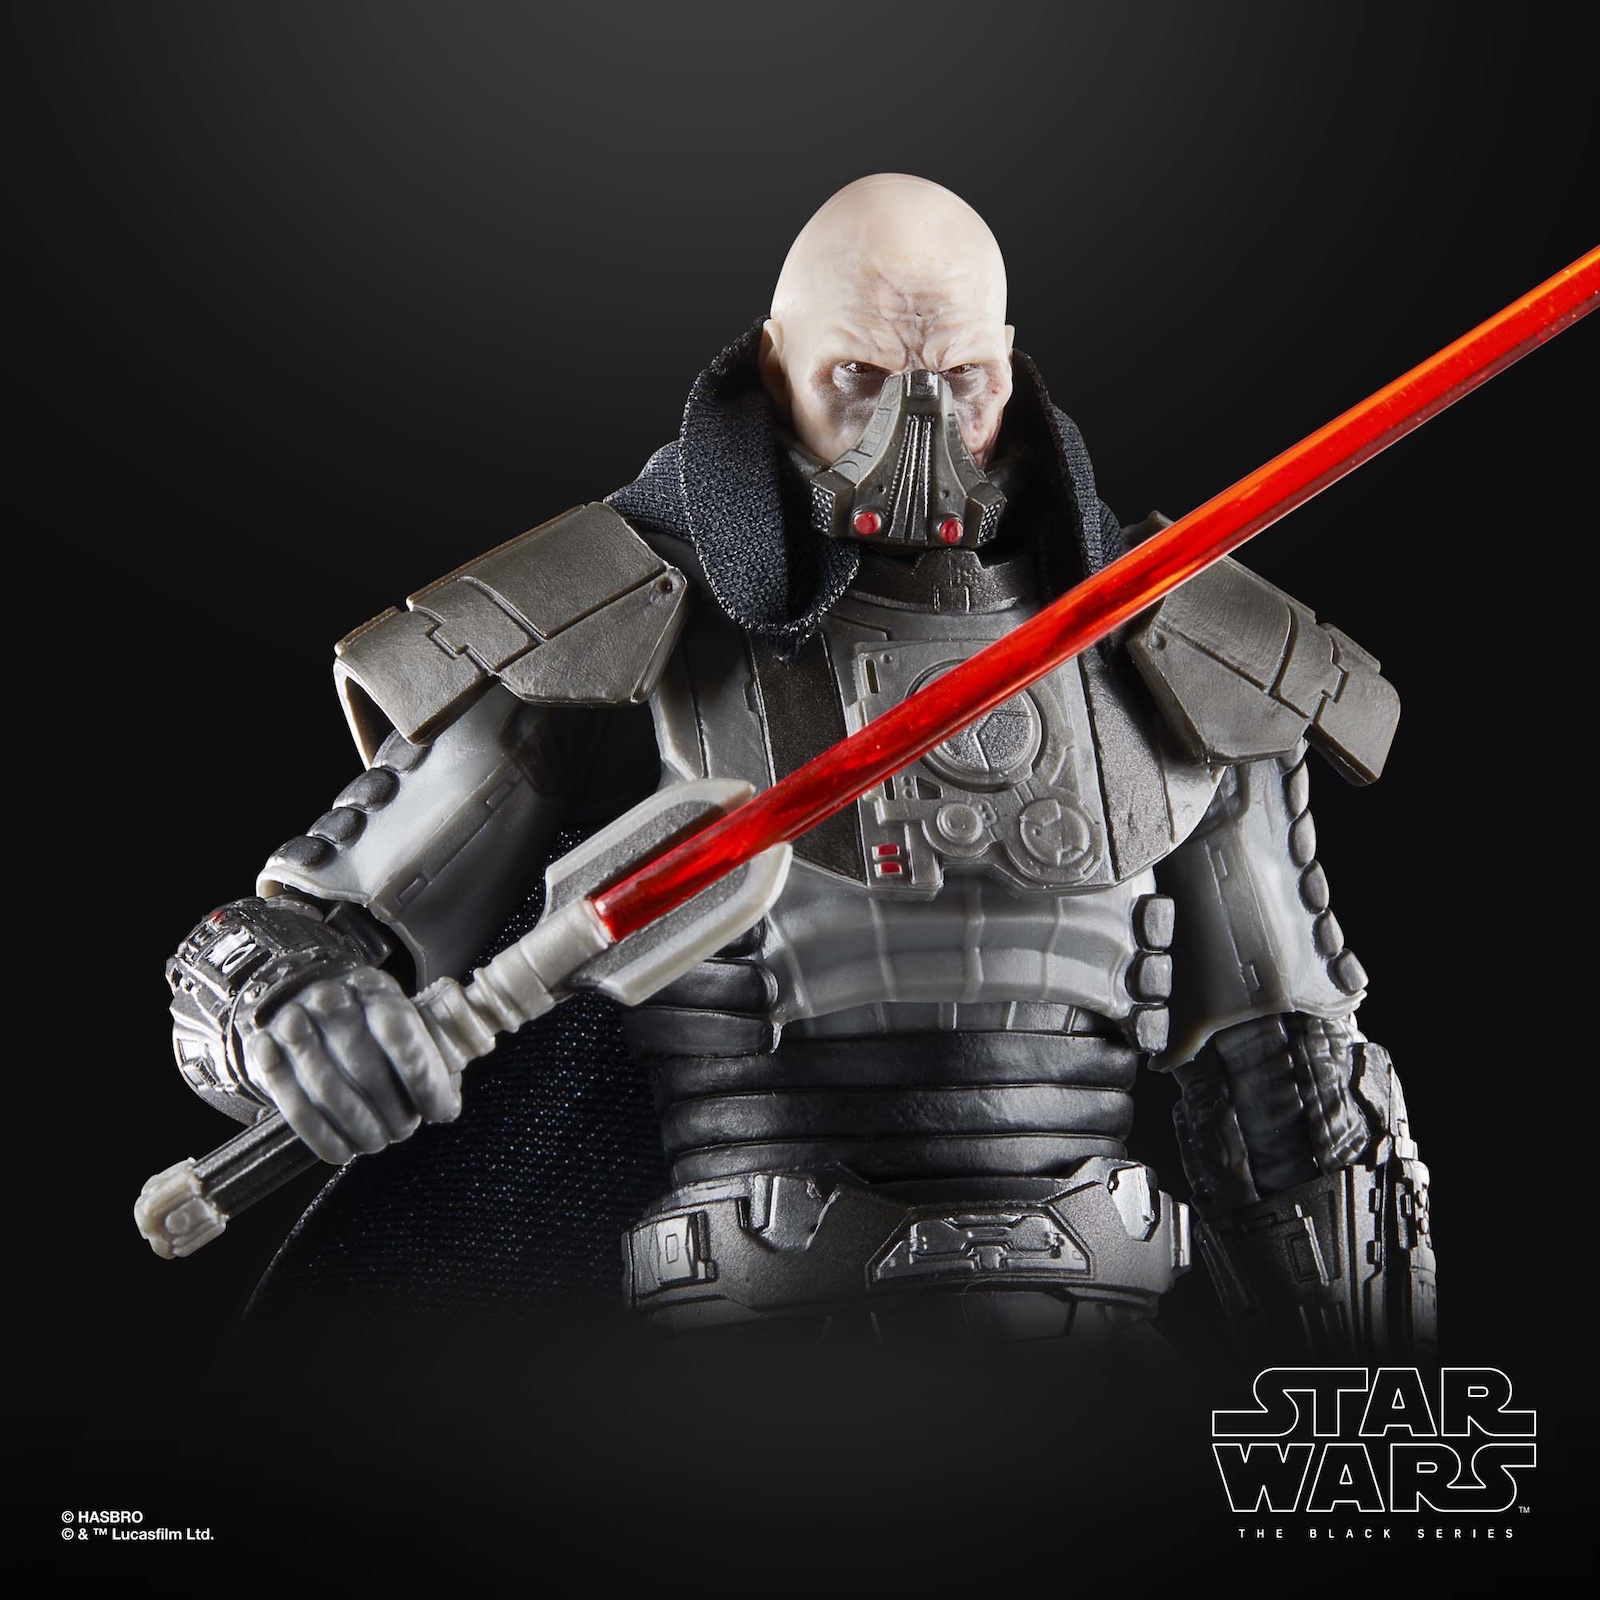 Hasbro Star Wars: May the 4th Vintage Collection and Black Series reveals